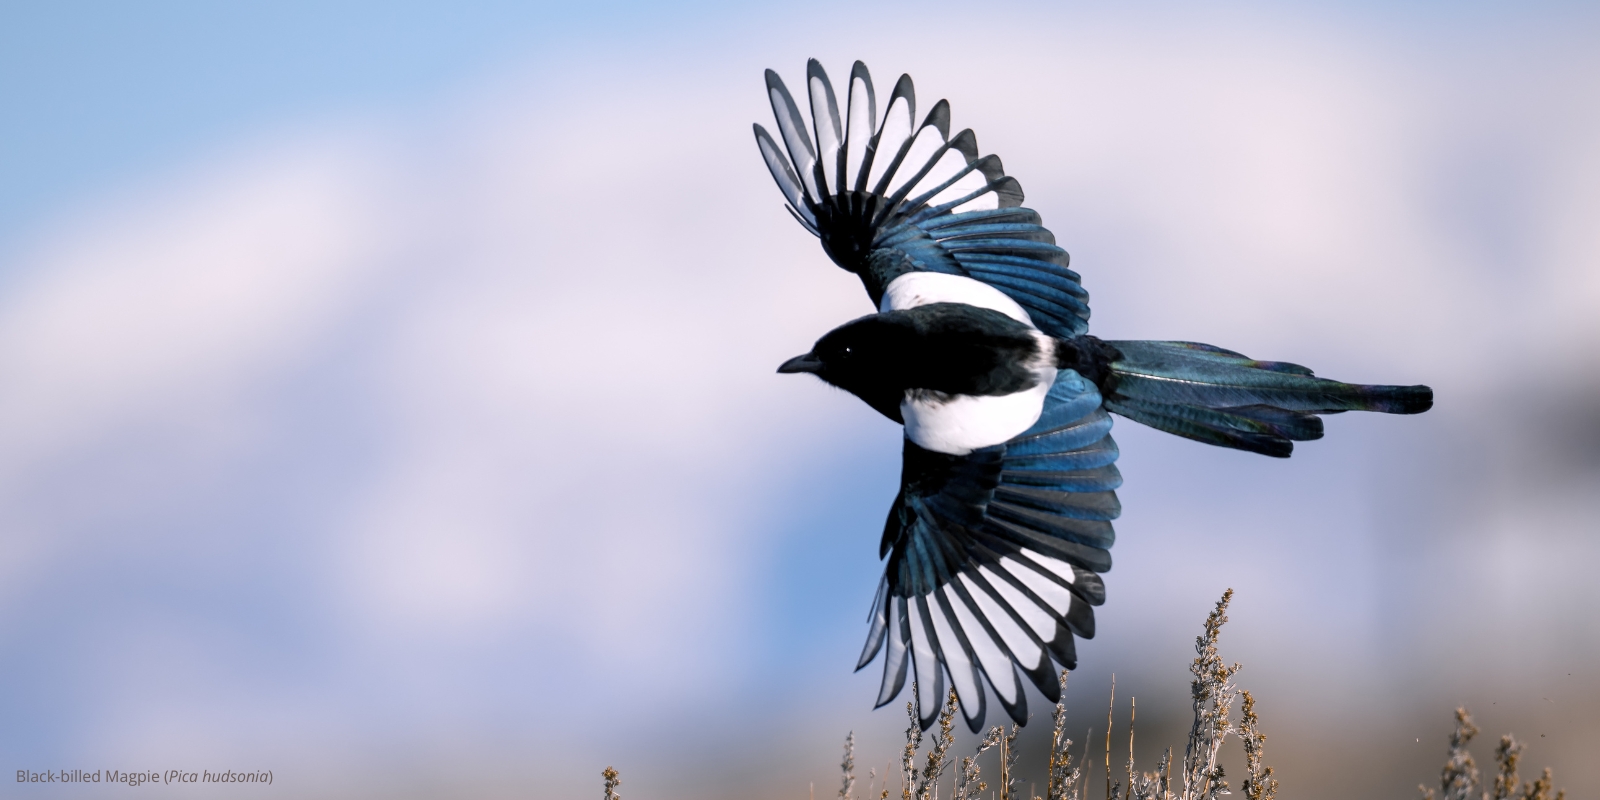 Black-billed Magpie Pica hudsonia in flight against a clouded sky